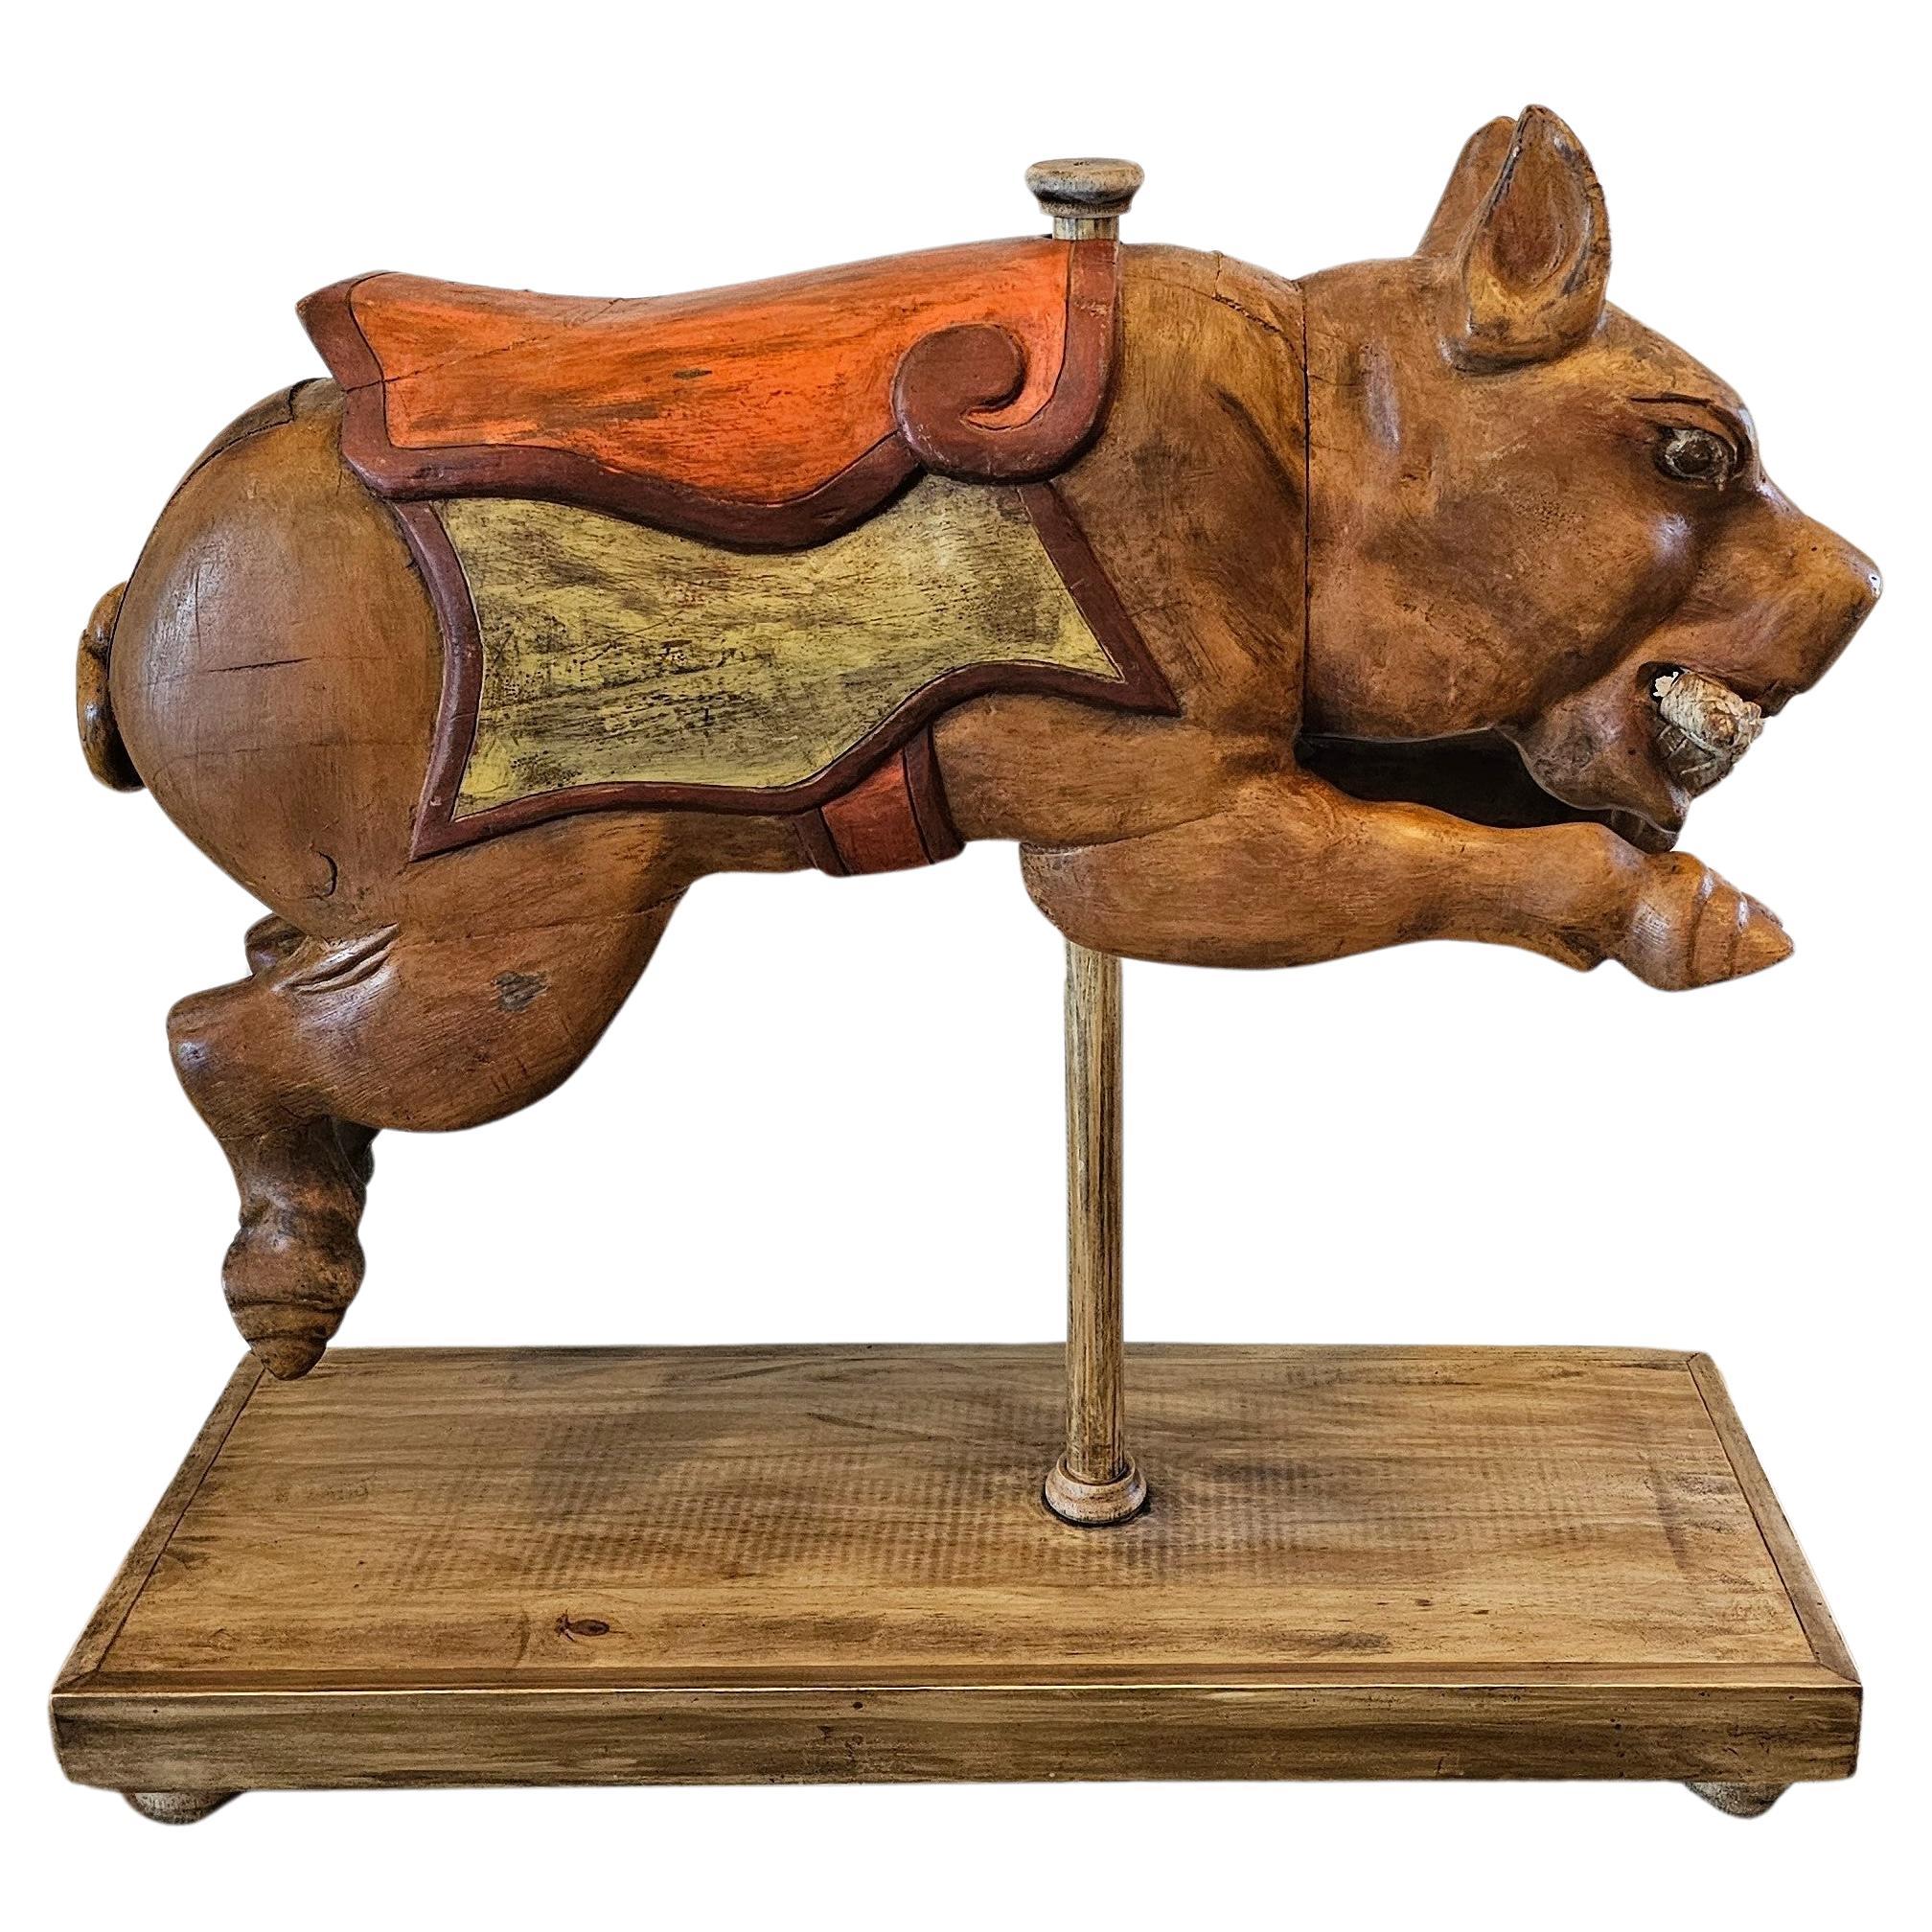 A rare and whimsical vintage Mexican carnival amusement ride carousel pig attributed to the Higareda workshop.

This ultra charming carousel pig carving was made in a smaller scale for a traveling carnival with a carousel, making it the ideal scale